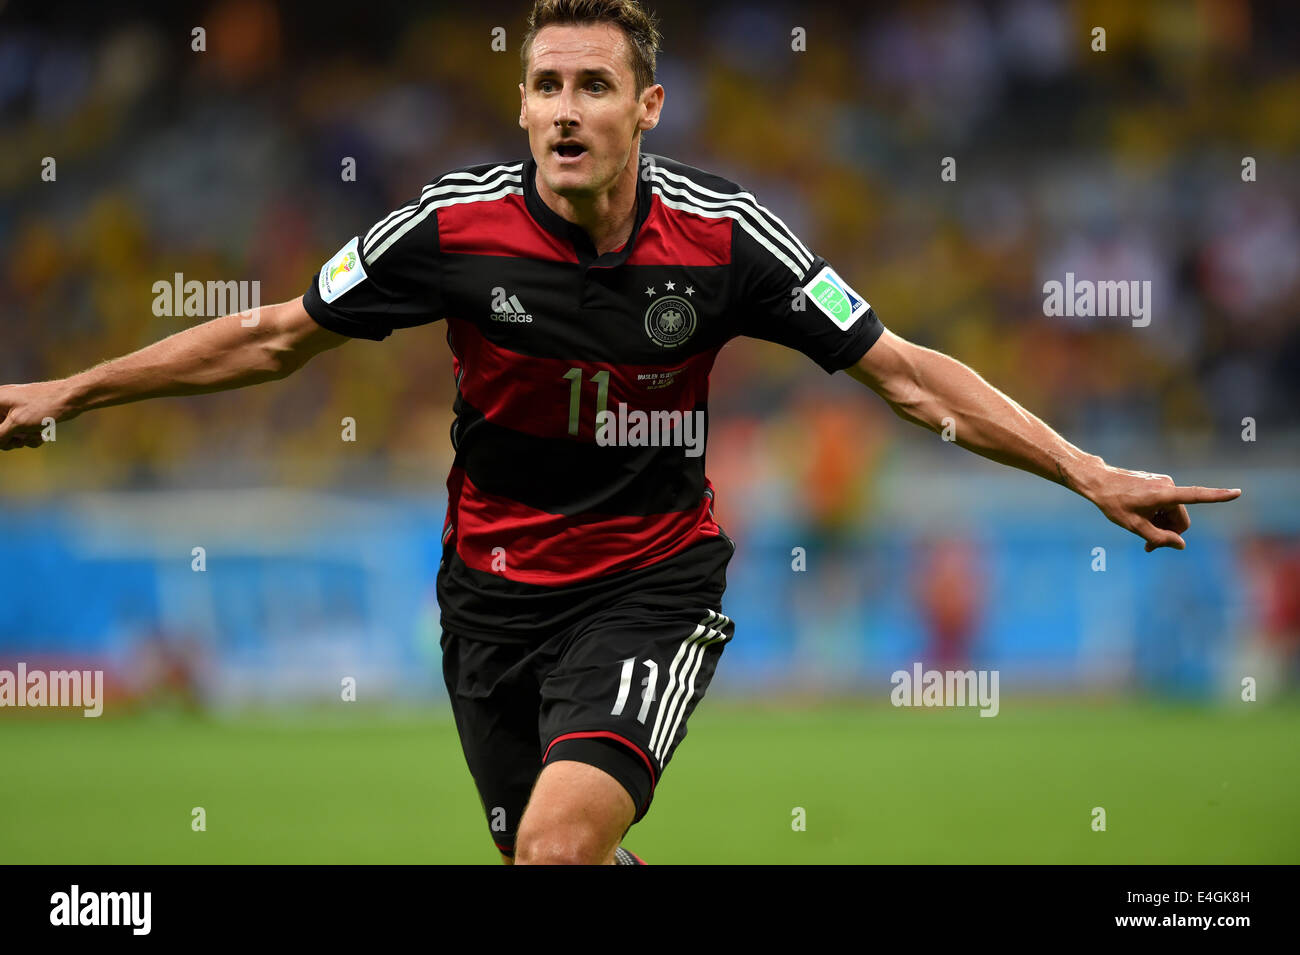 Belo Horizonte, Brazil. 8th July, 2014. Miroslav Klose (GER) Football/Soccer : Miroslav Klose of Germany celebrates after scoring his team's second goal during the FIFA World Cup Brazil 2014 Semi-finals match between Brazil 1-7 Germany at Estadio Mineirao in Belo Horizonte, Brazil . © FAR EAST PRESS/AFLO/Alamy Live News Stock Photo